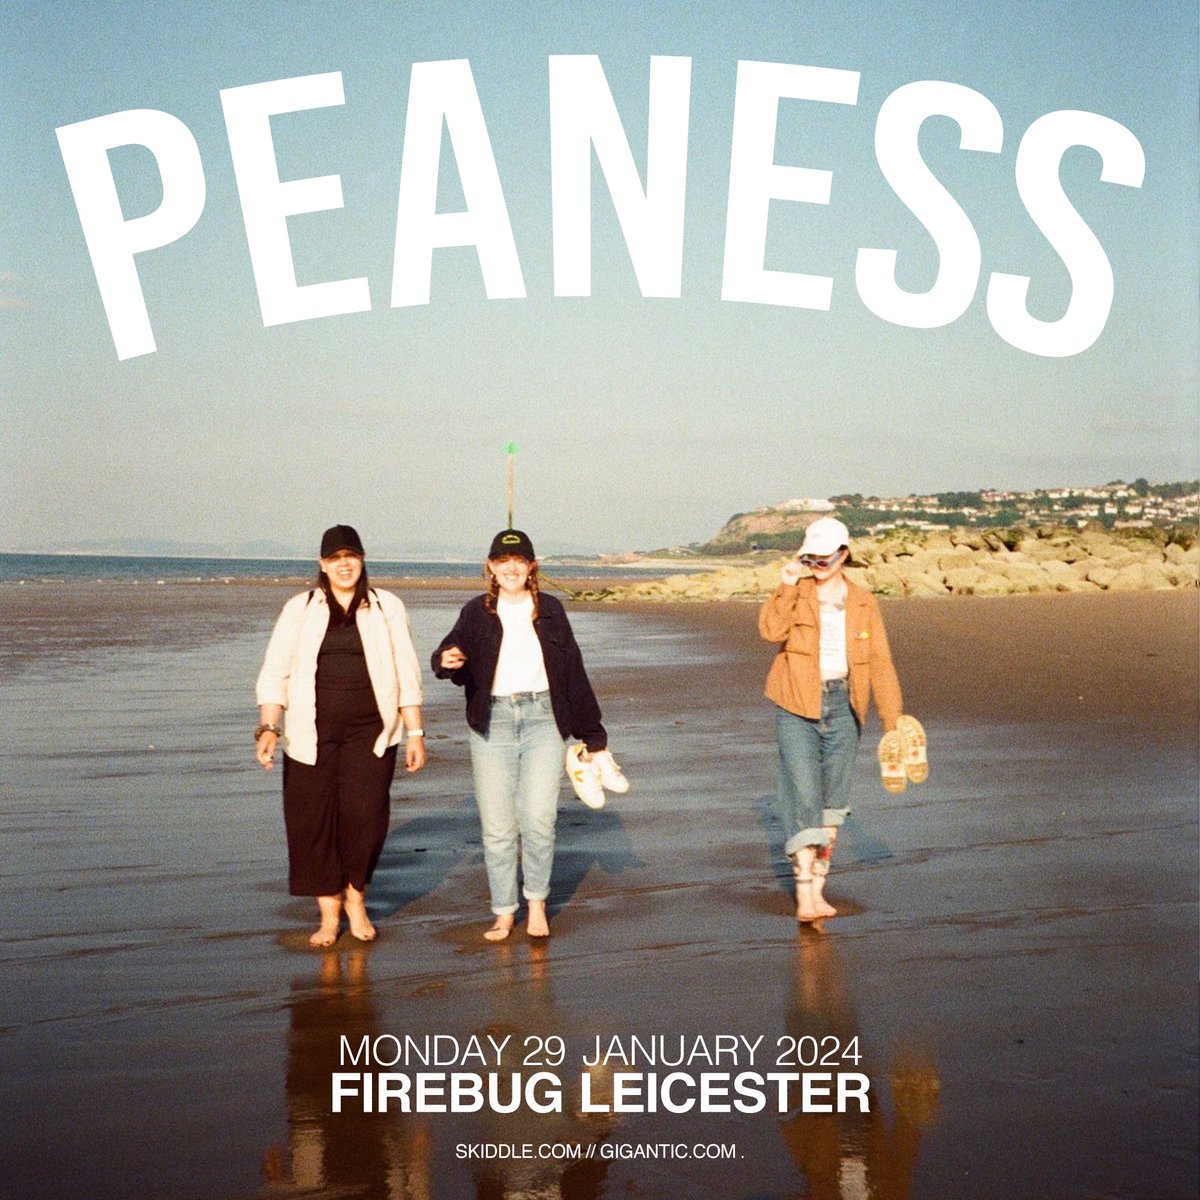 Here’s another for @IVW_UK and it’s a banger! @PeanessBand at @FirebugBar on Mon 29th January!